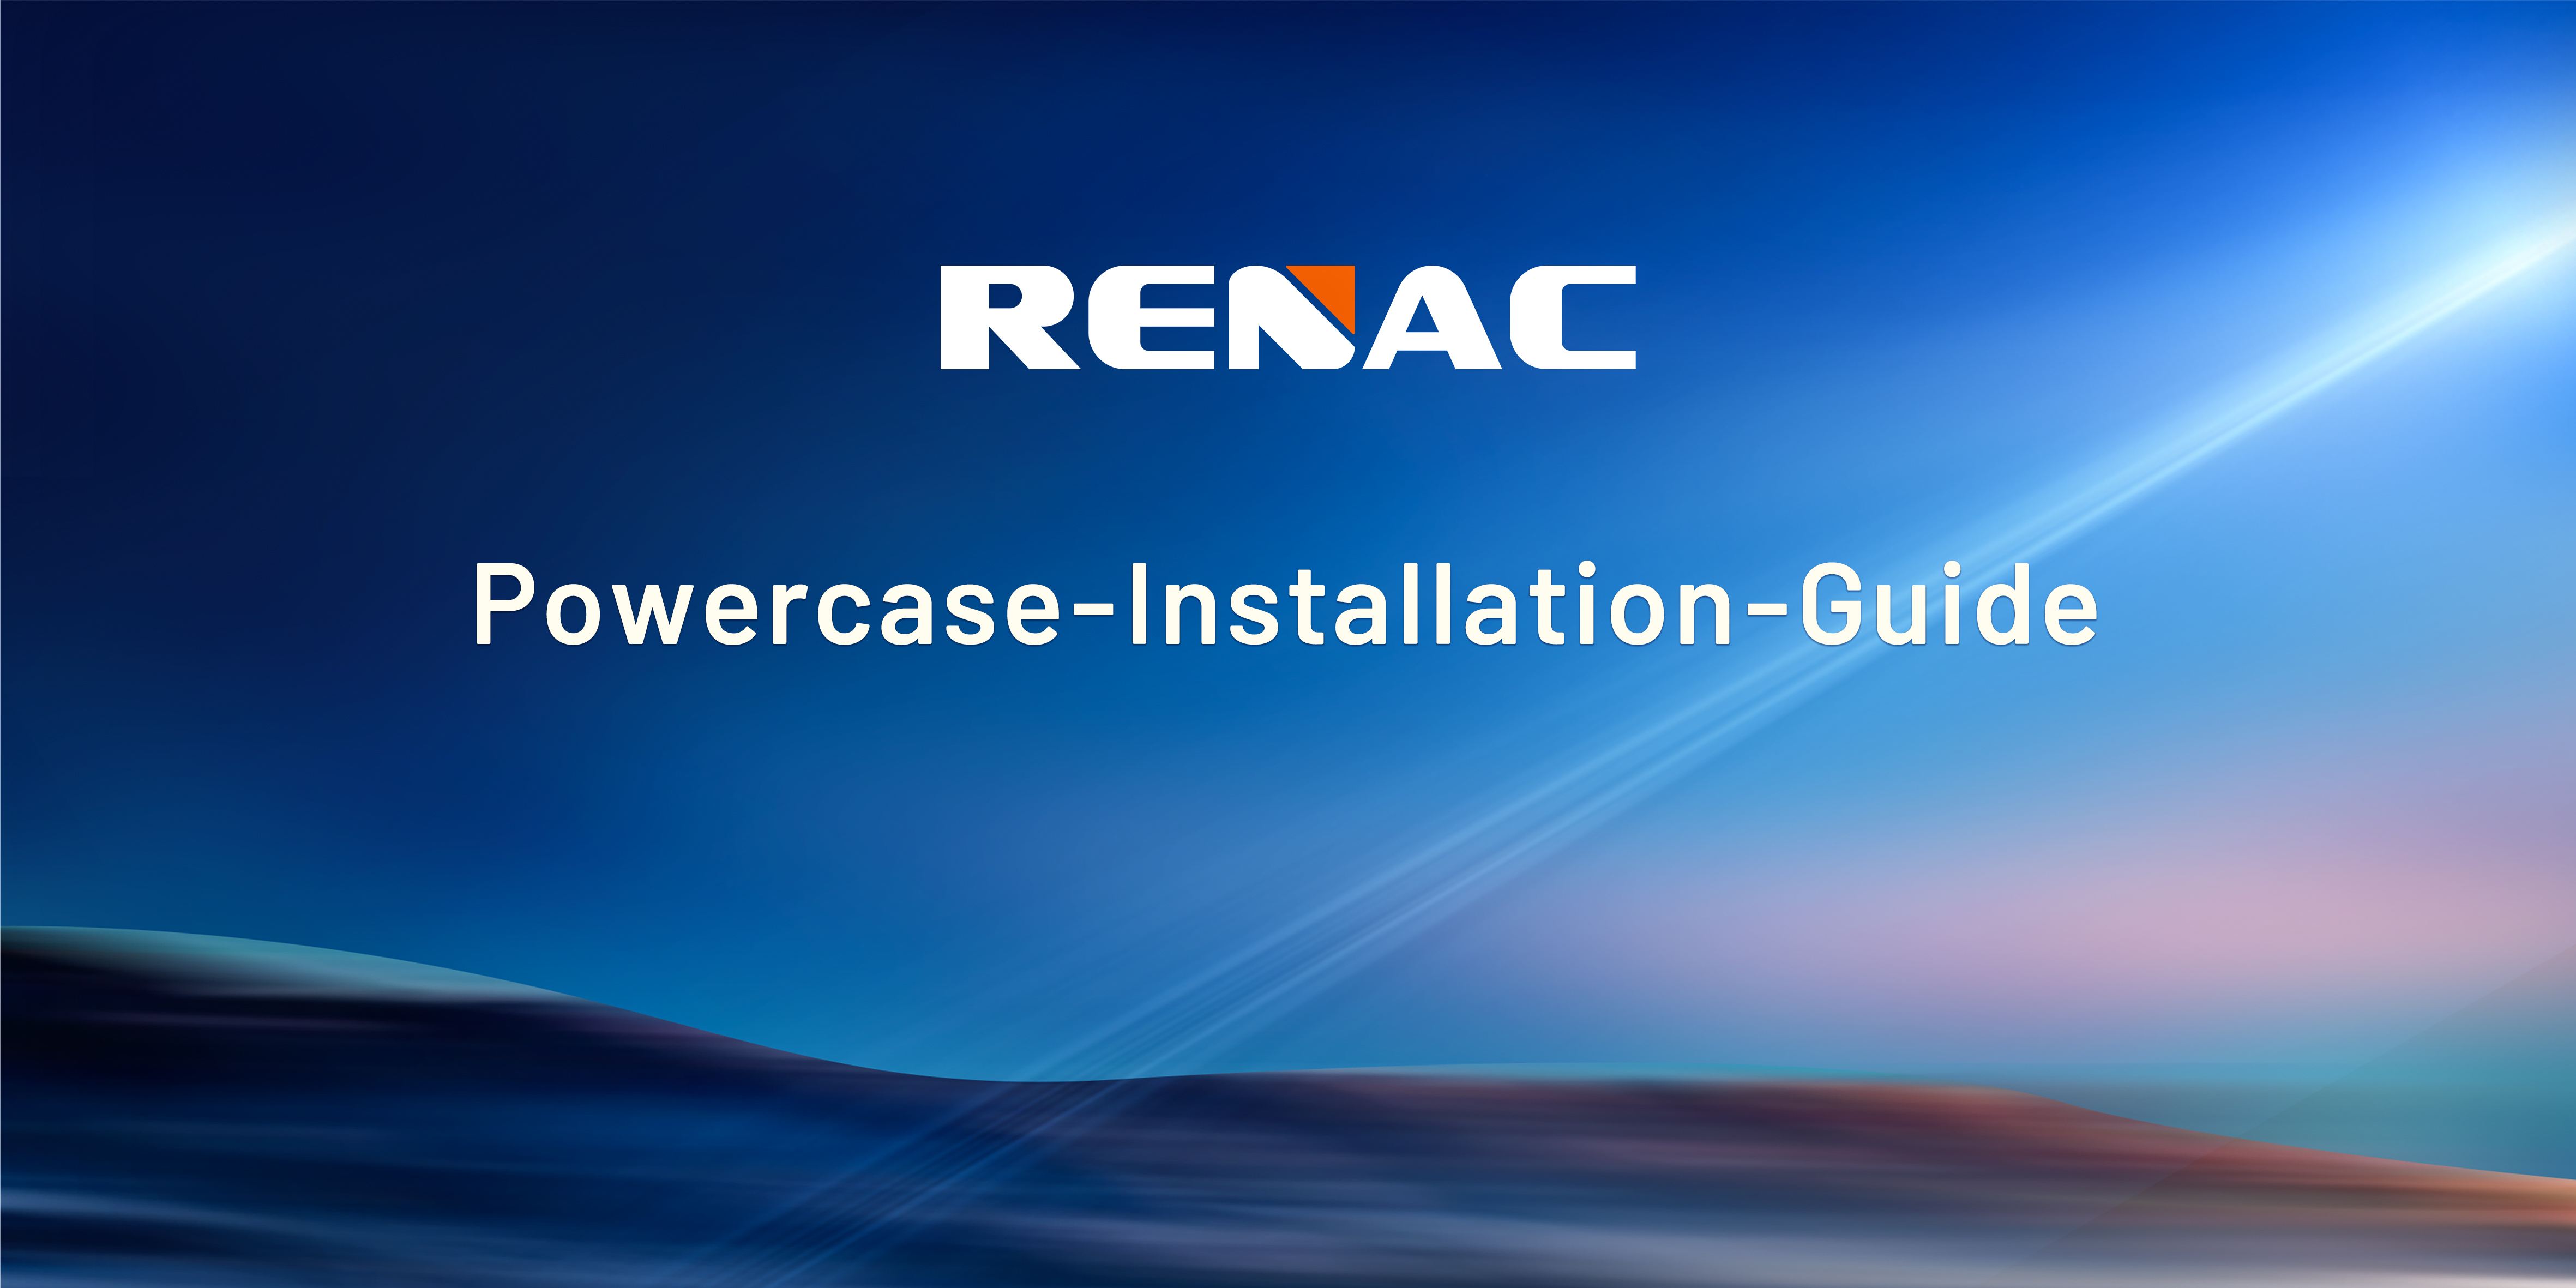 Powercase-Installation-Guide